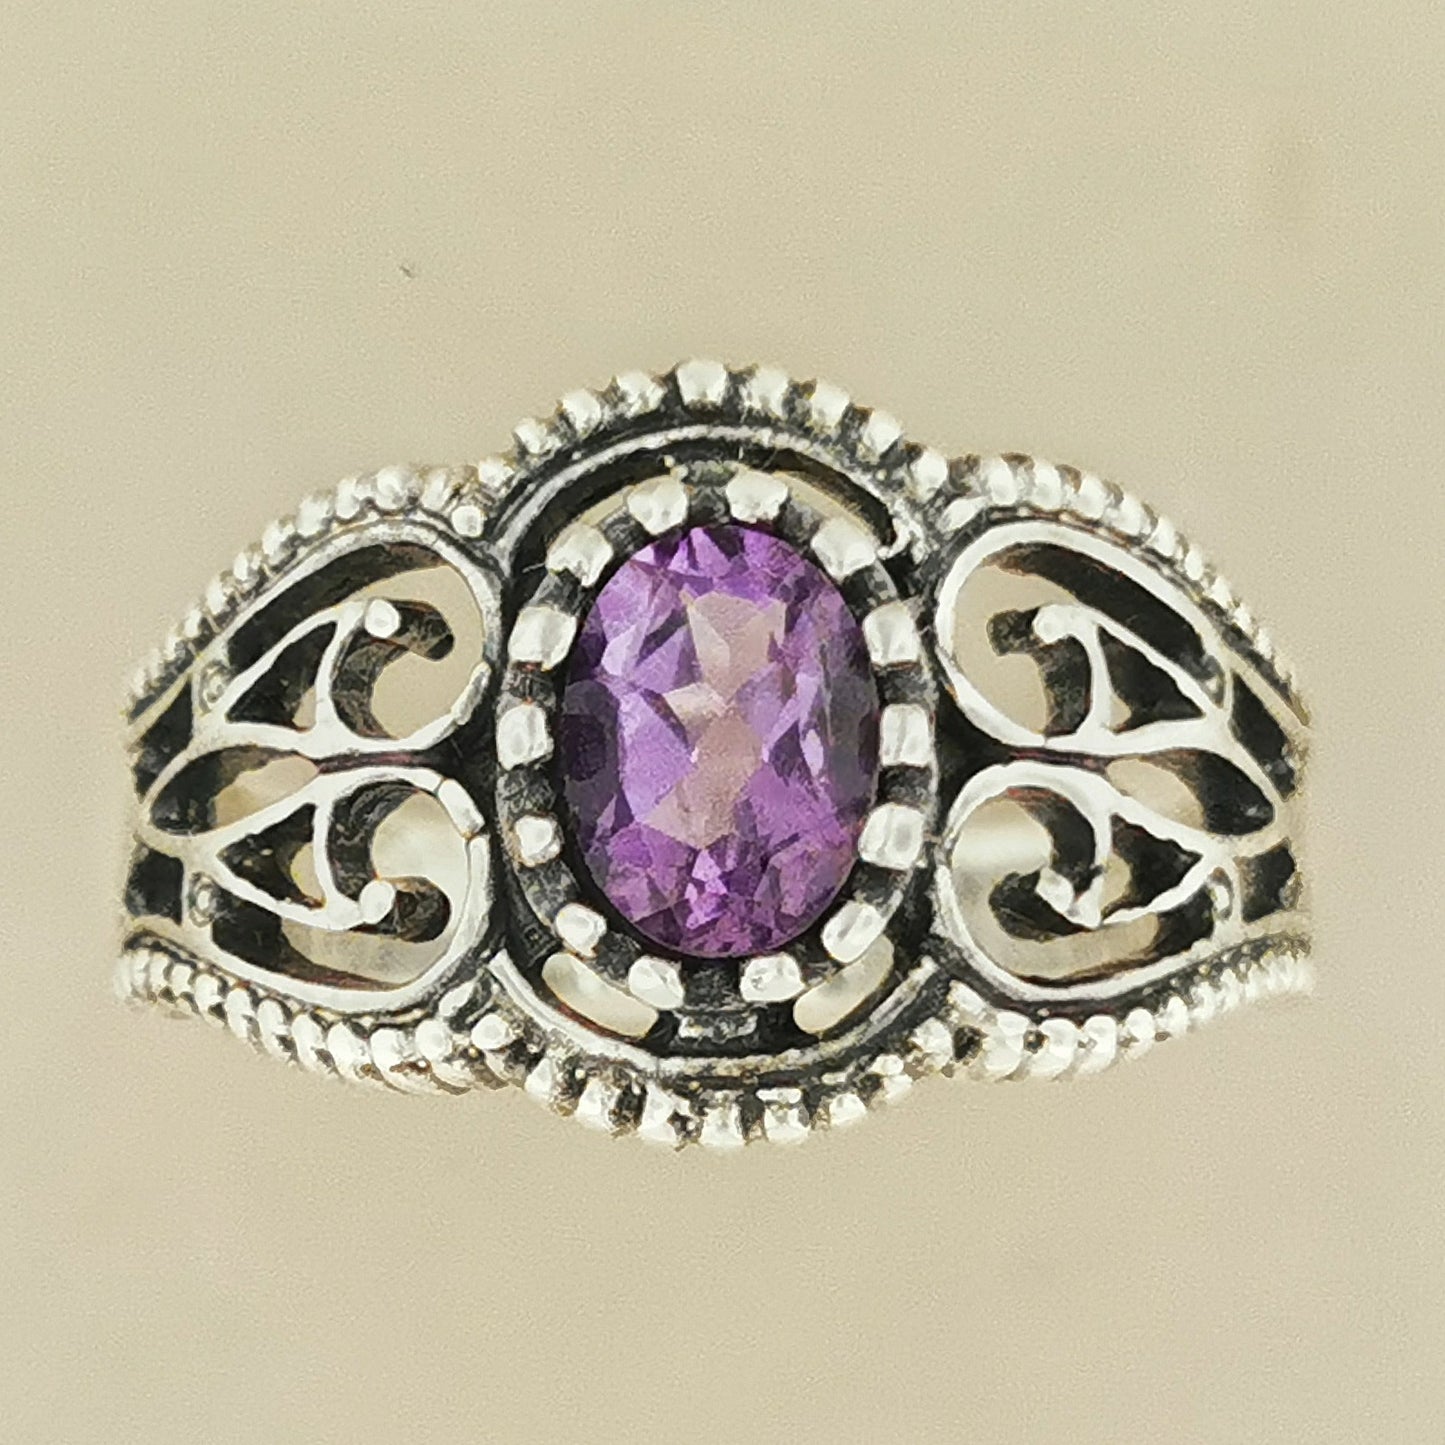 Vintage Style Filigree Ring with Gemstone in Sterling Silver